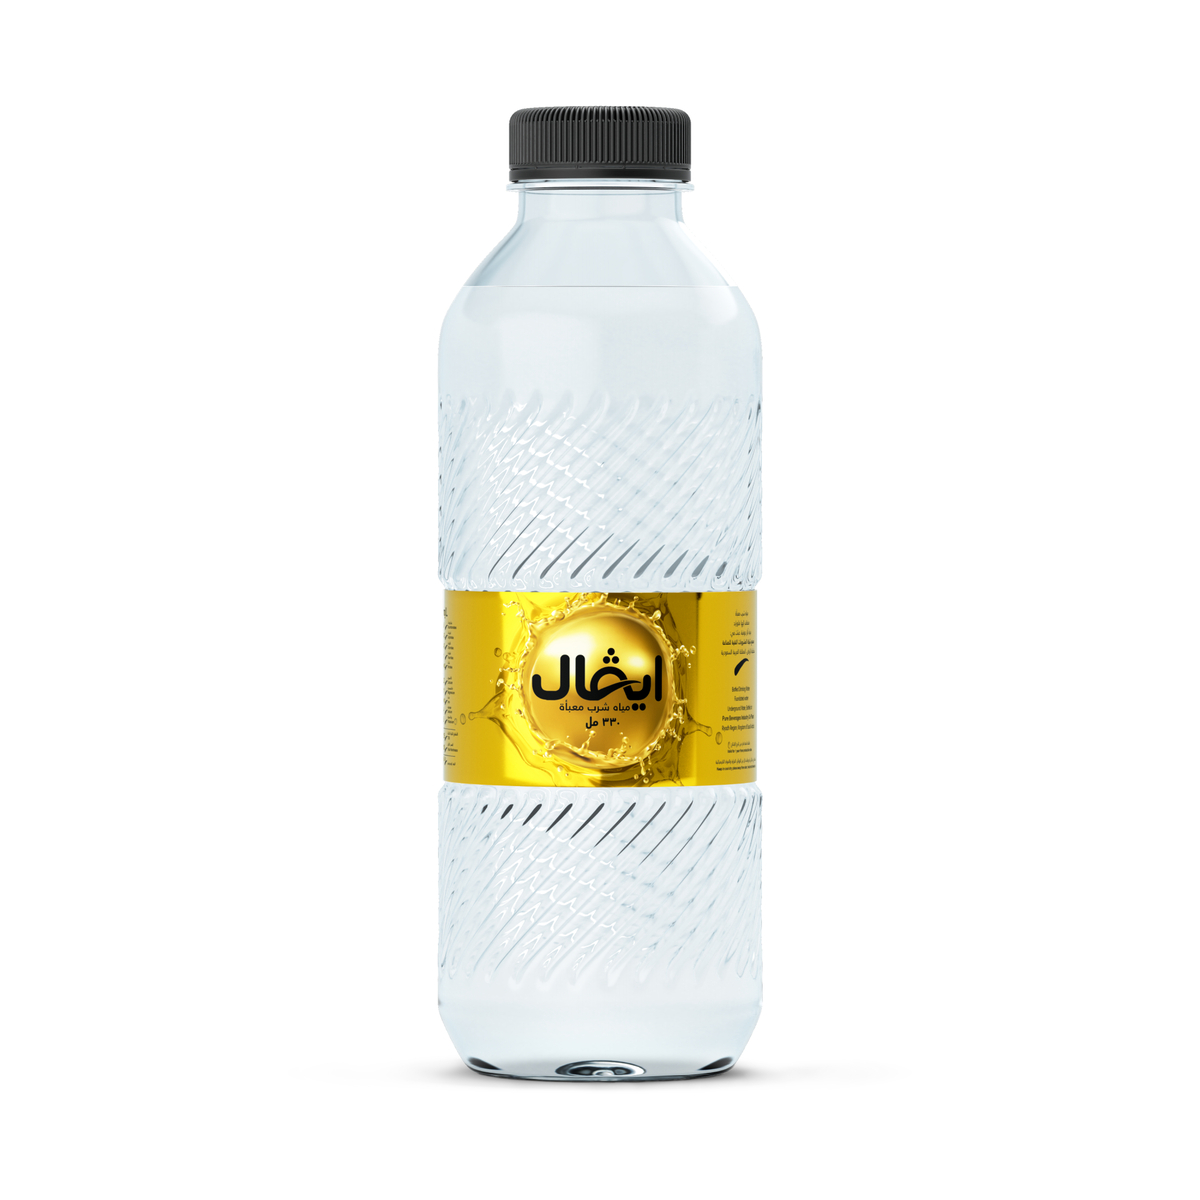 Ival Bottled Drinking Water 40 x 330ml